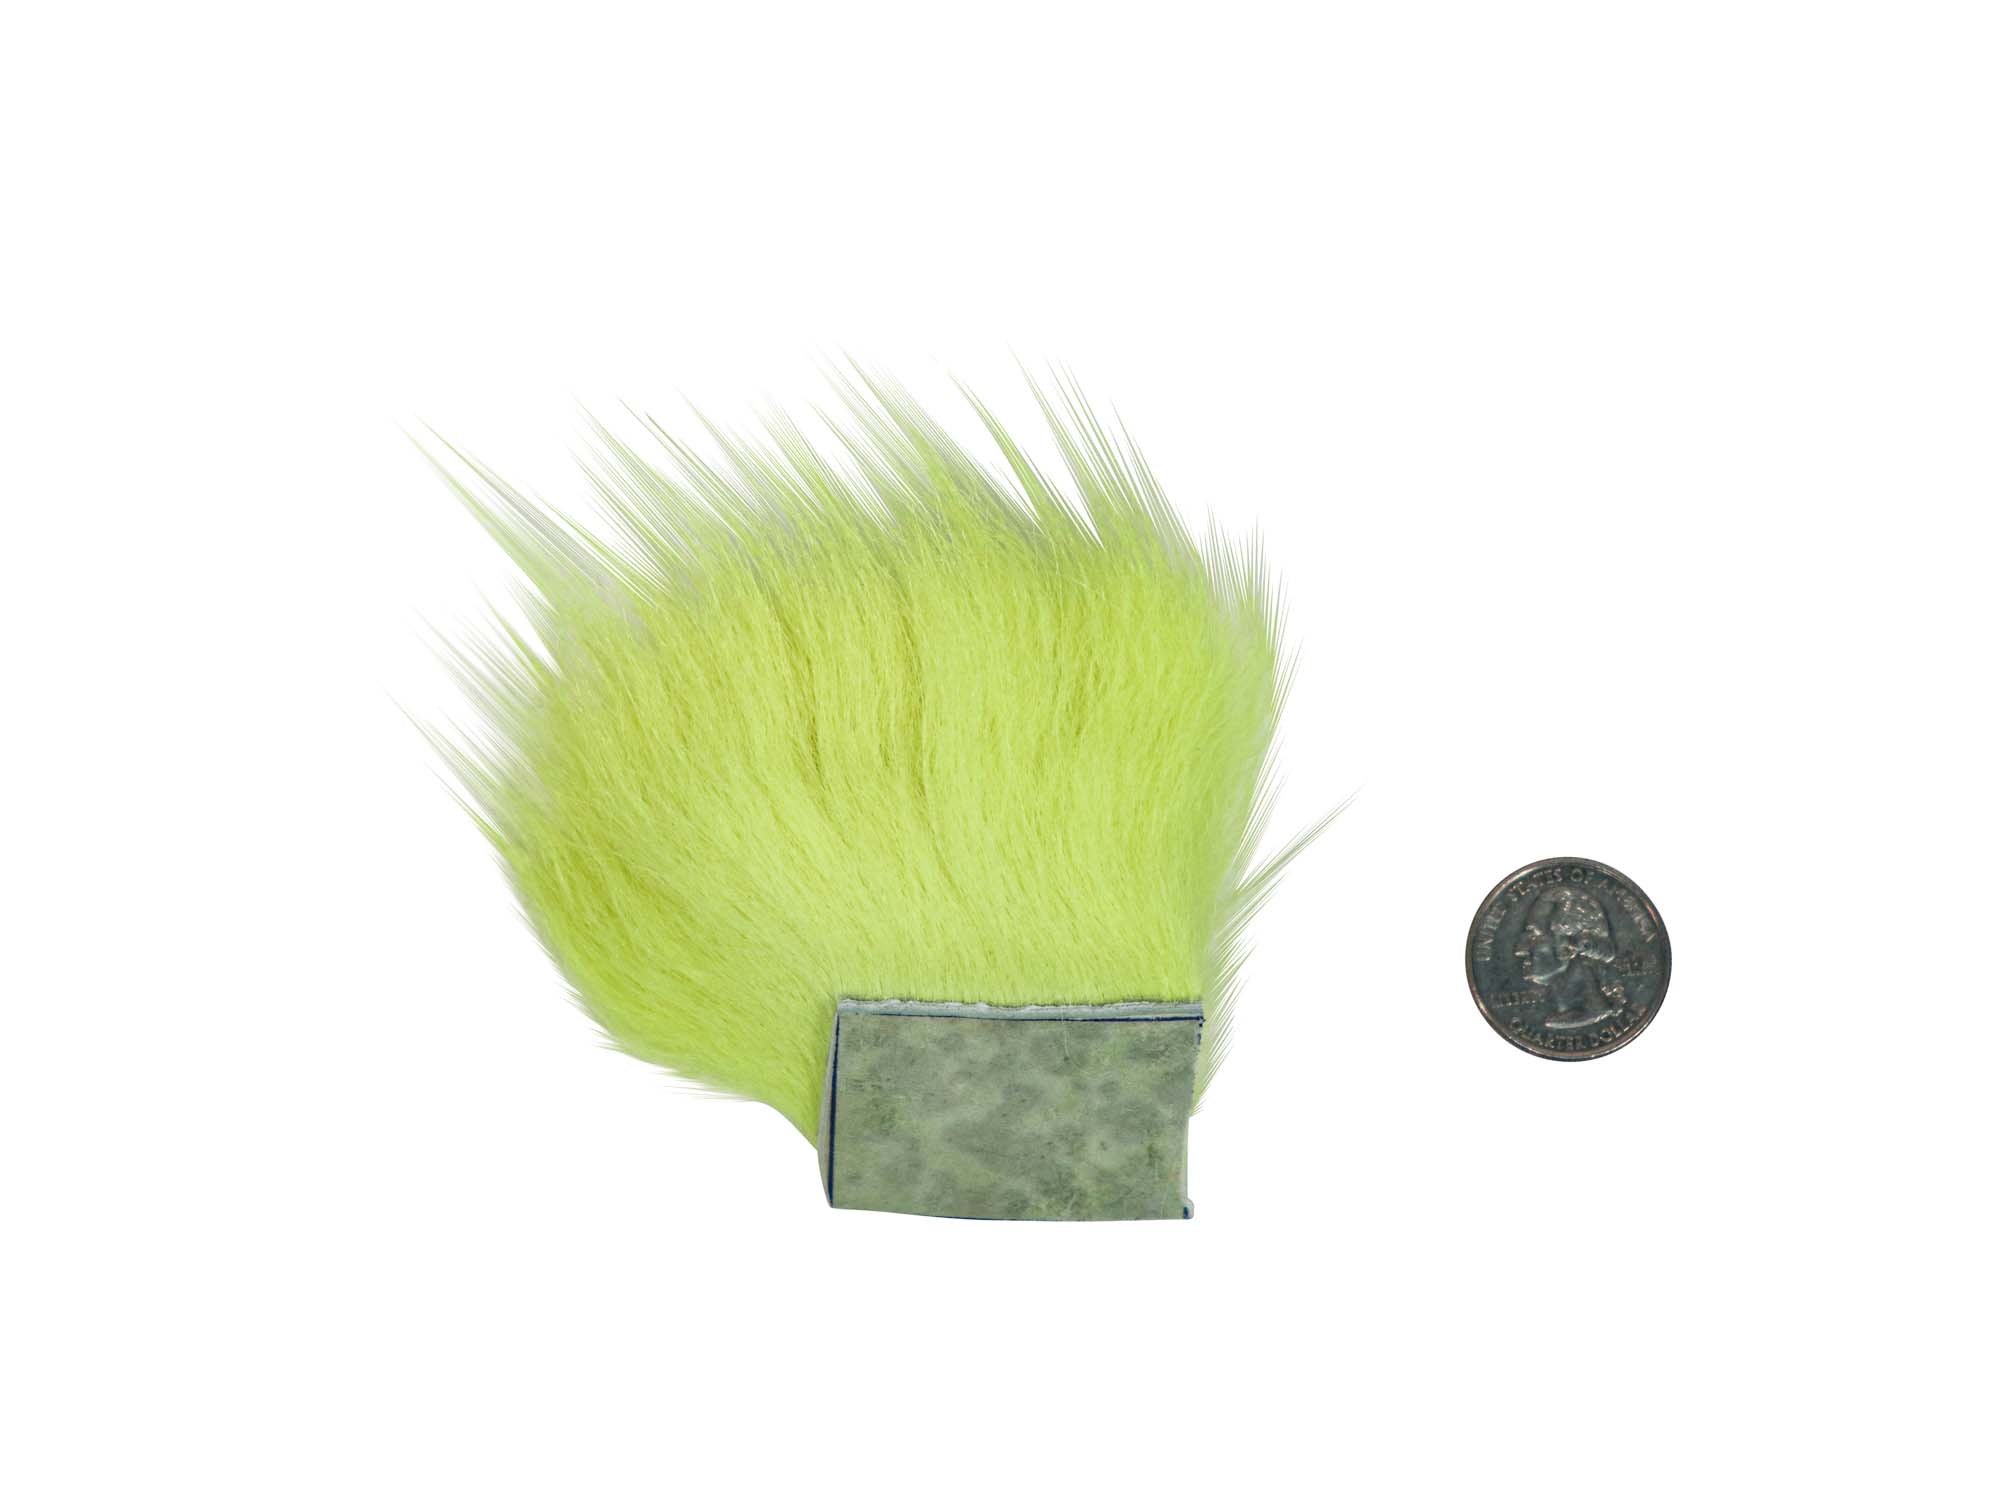 Dyed Arctic Runner Fly Fishing Piece: Fluorescent Yellow - 1377-FY-AS (9UL4)